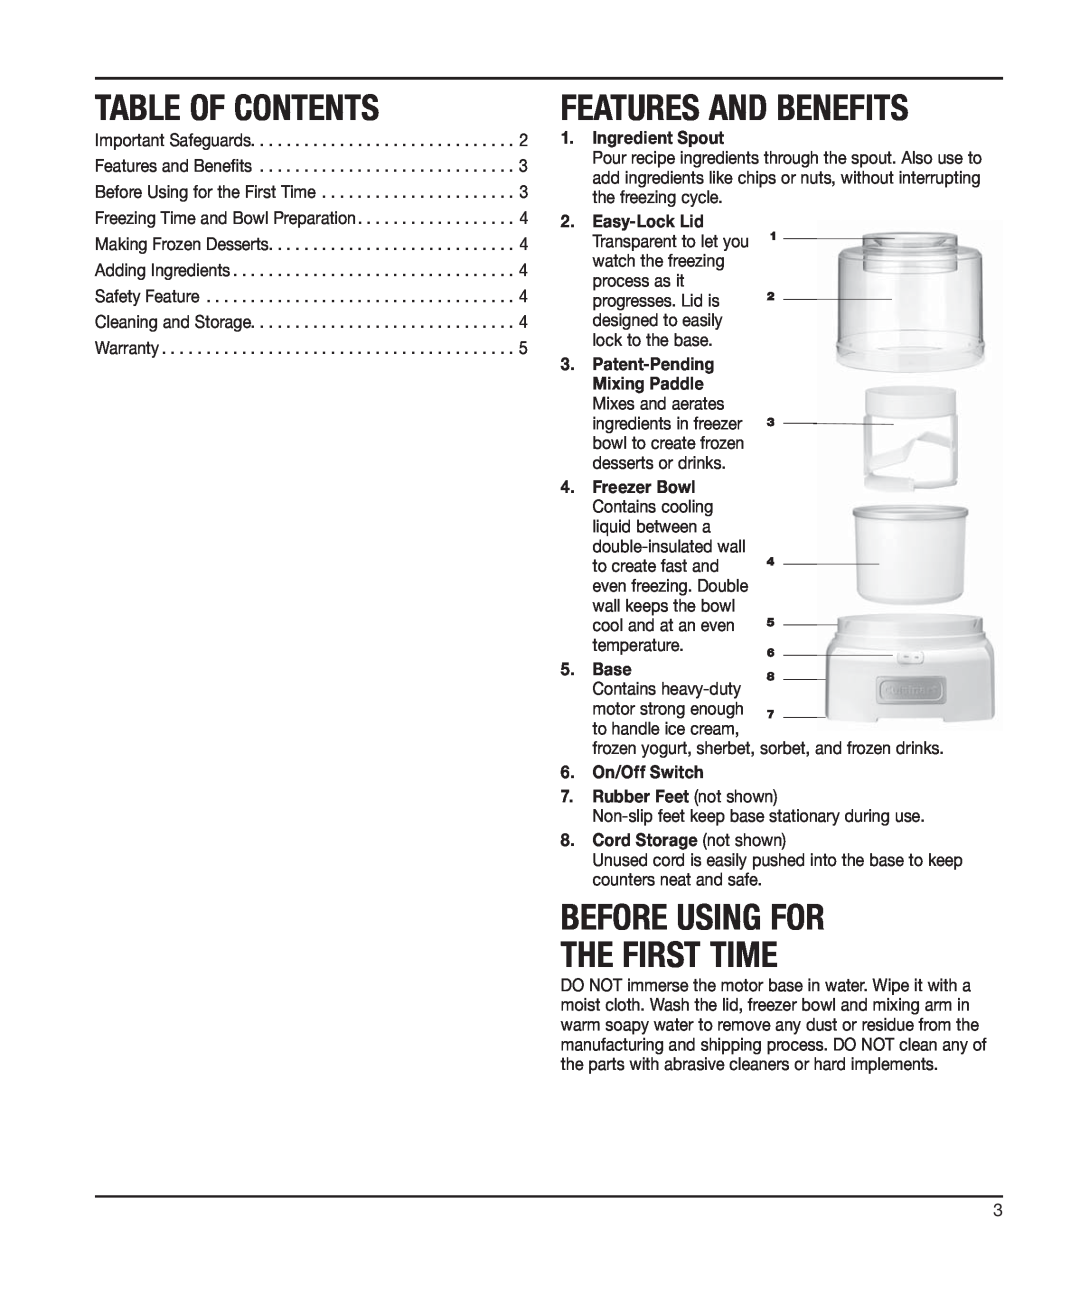 Cuisinart ICE-21 Table Of Contents, Features And Benefits, Before Using For The First Time, Ingredient Spout, Freezer Bowl 